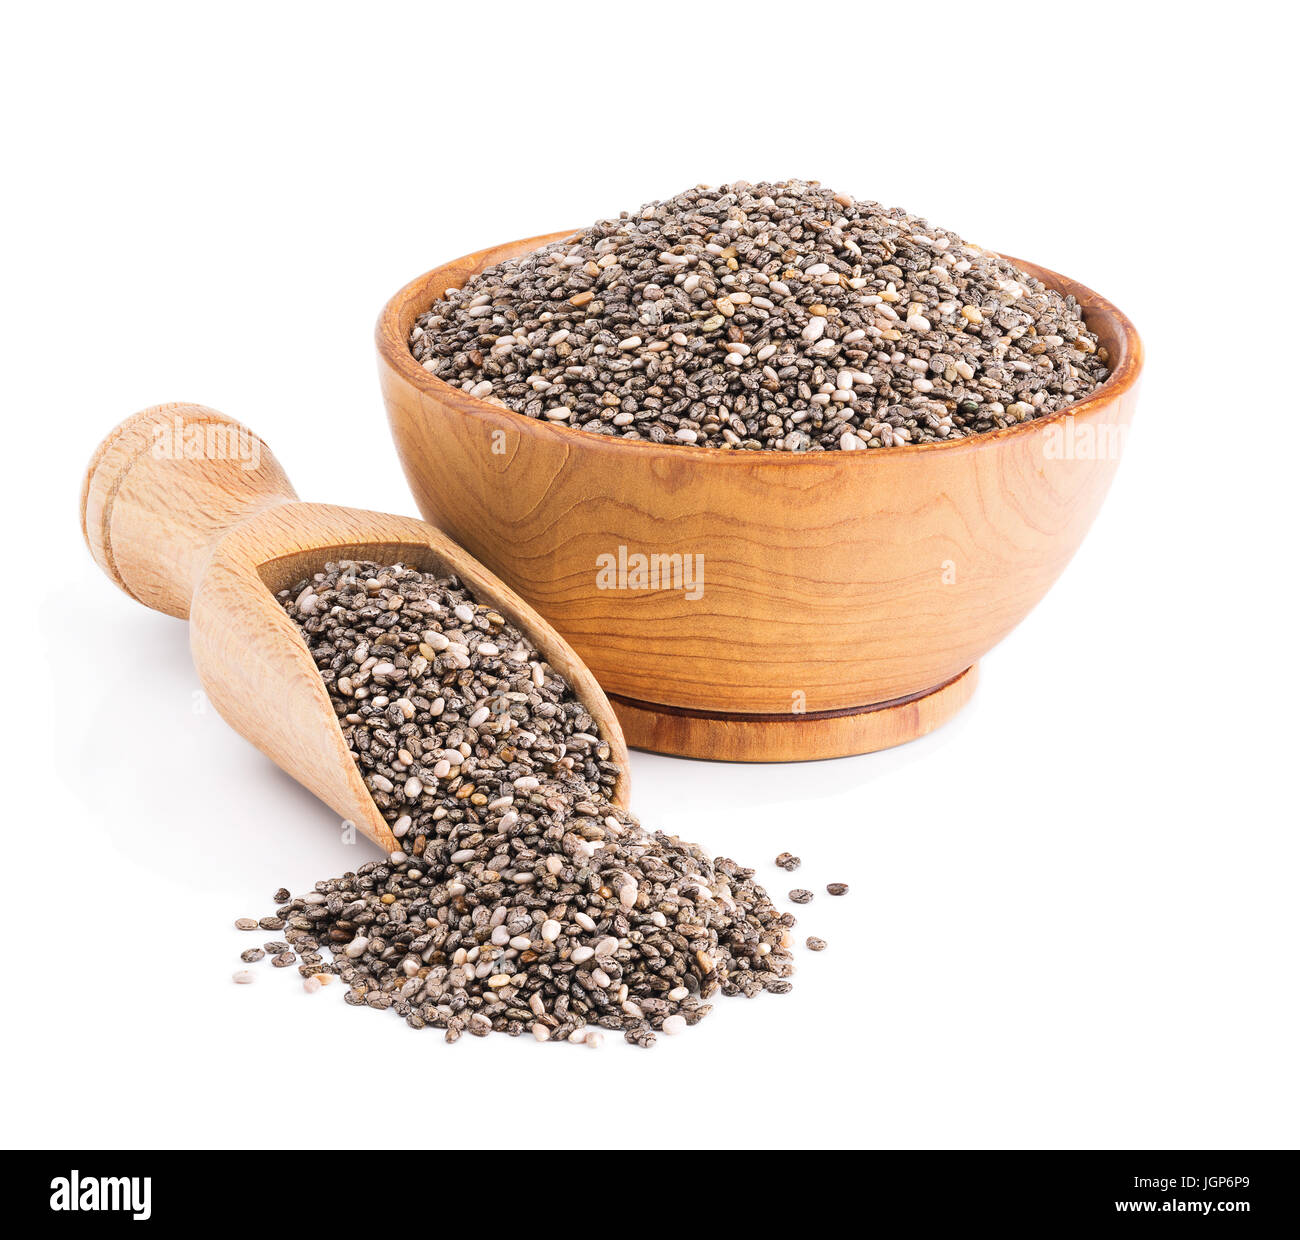 Chia seeds in a wooden bowl isolated on white Stock Photo